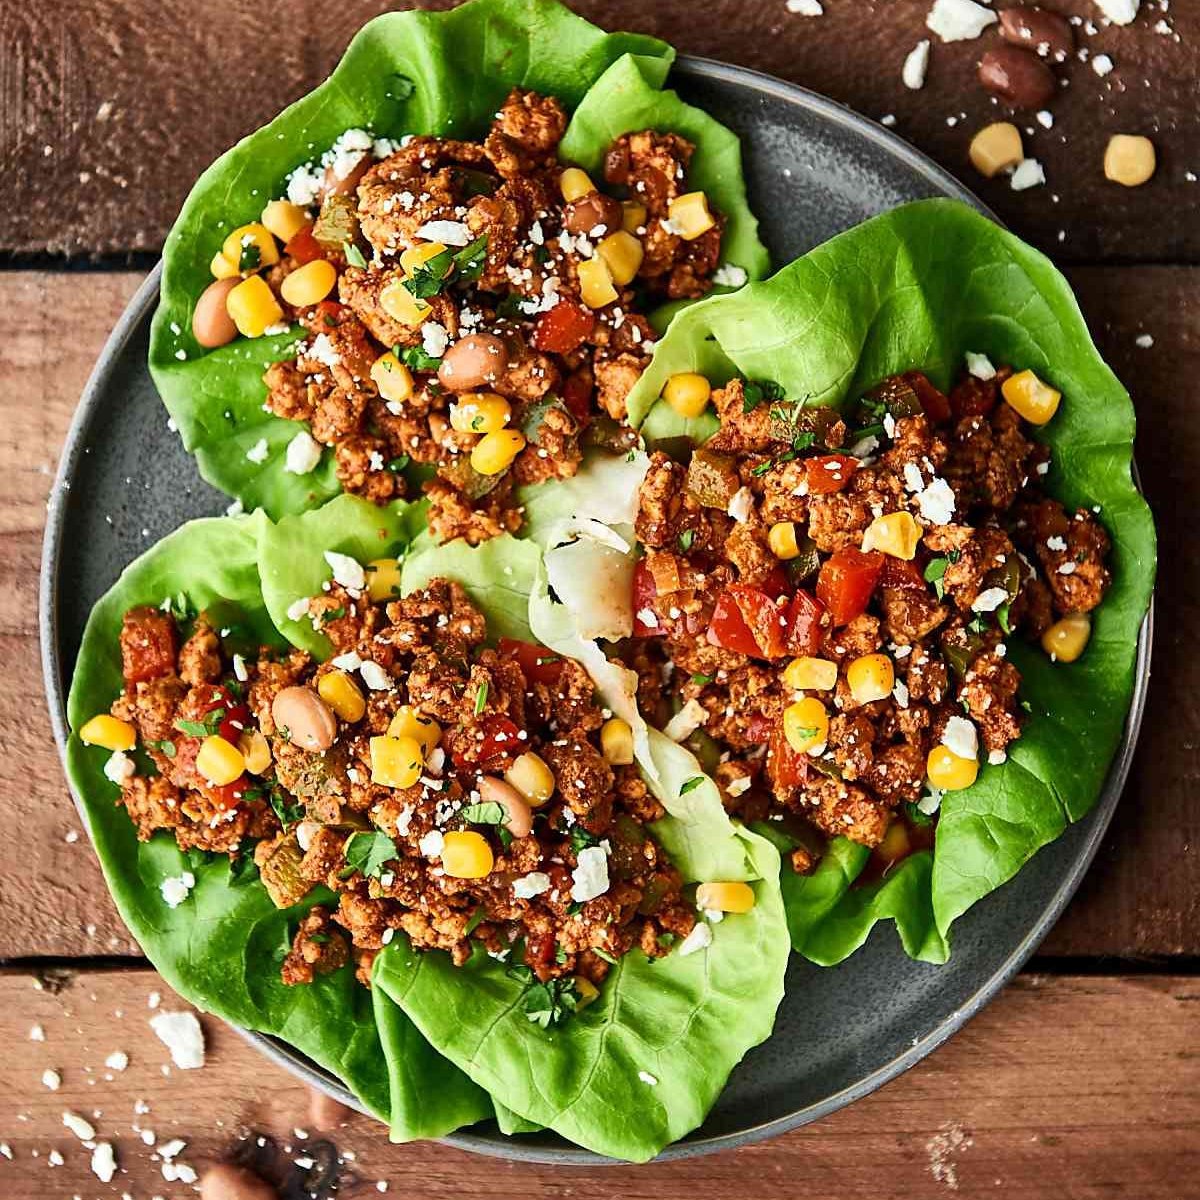 Ground Turkey Lettuce Tacos Turkey Tacos are loaded with extra lean ground turkey, onion, bell peppers, and spices. These are great if you're looking for something high in protein but also low in calories🌮. 👇 plainvillefarms.com/ground-turkey-…